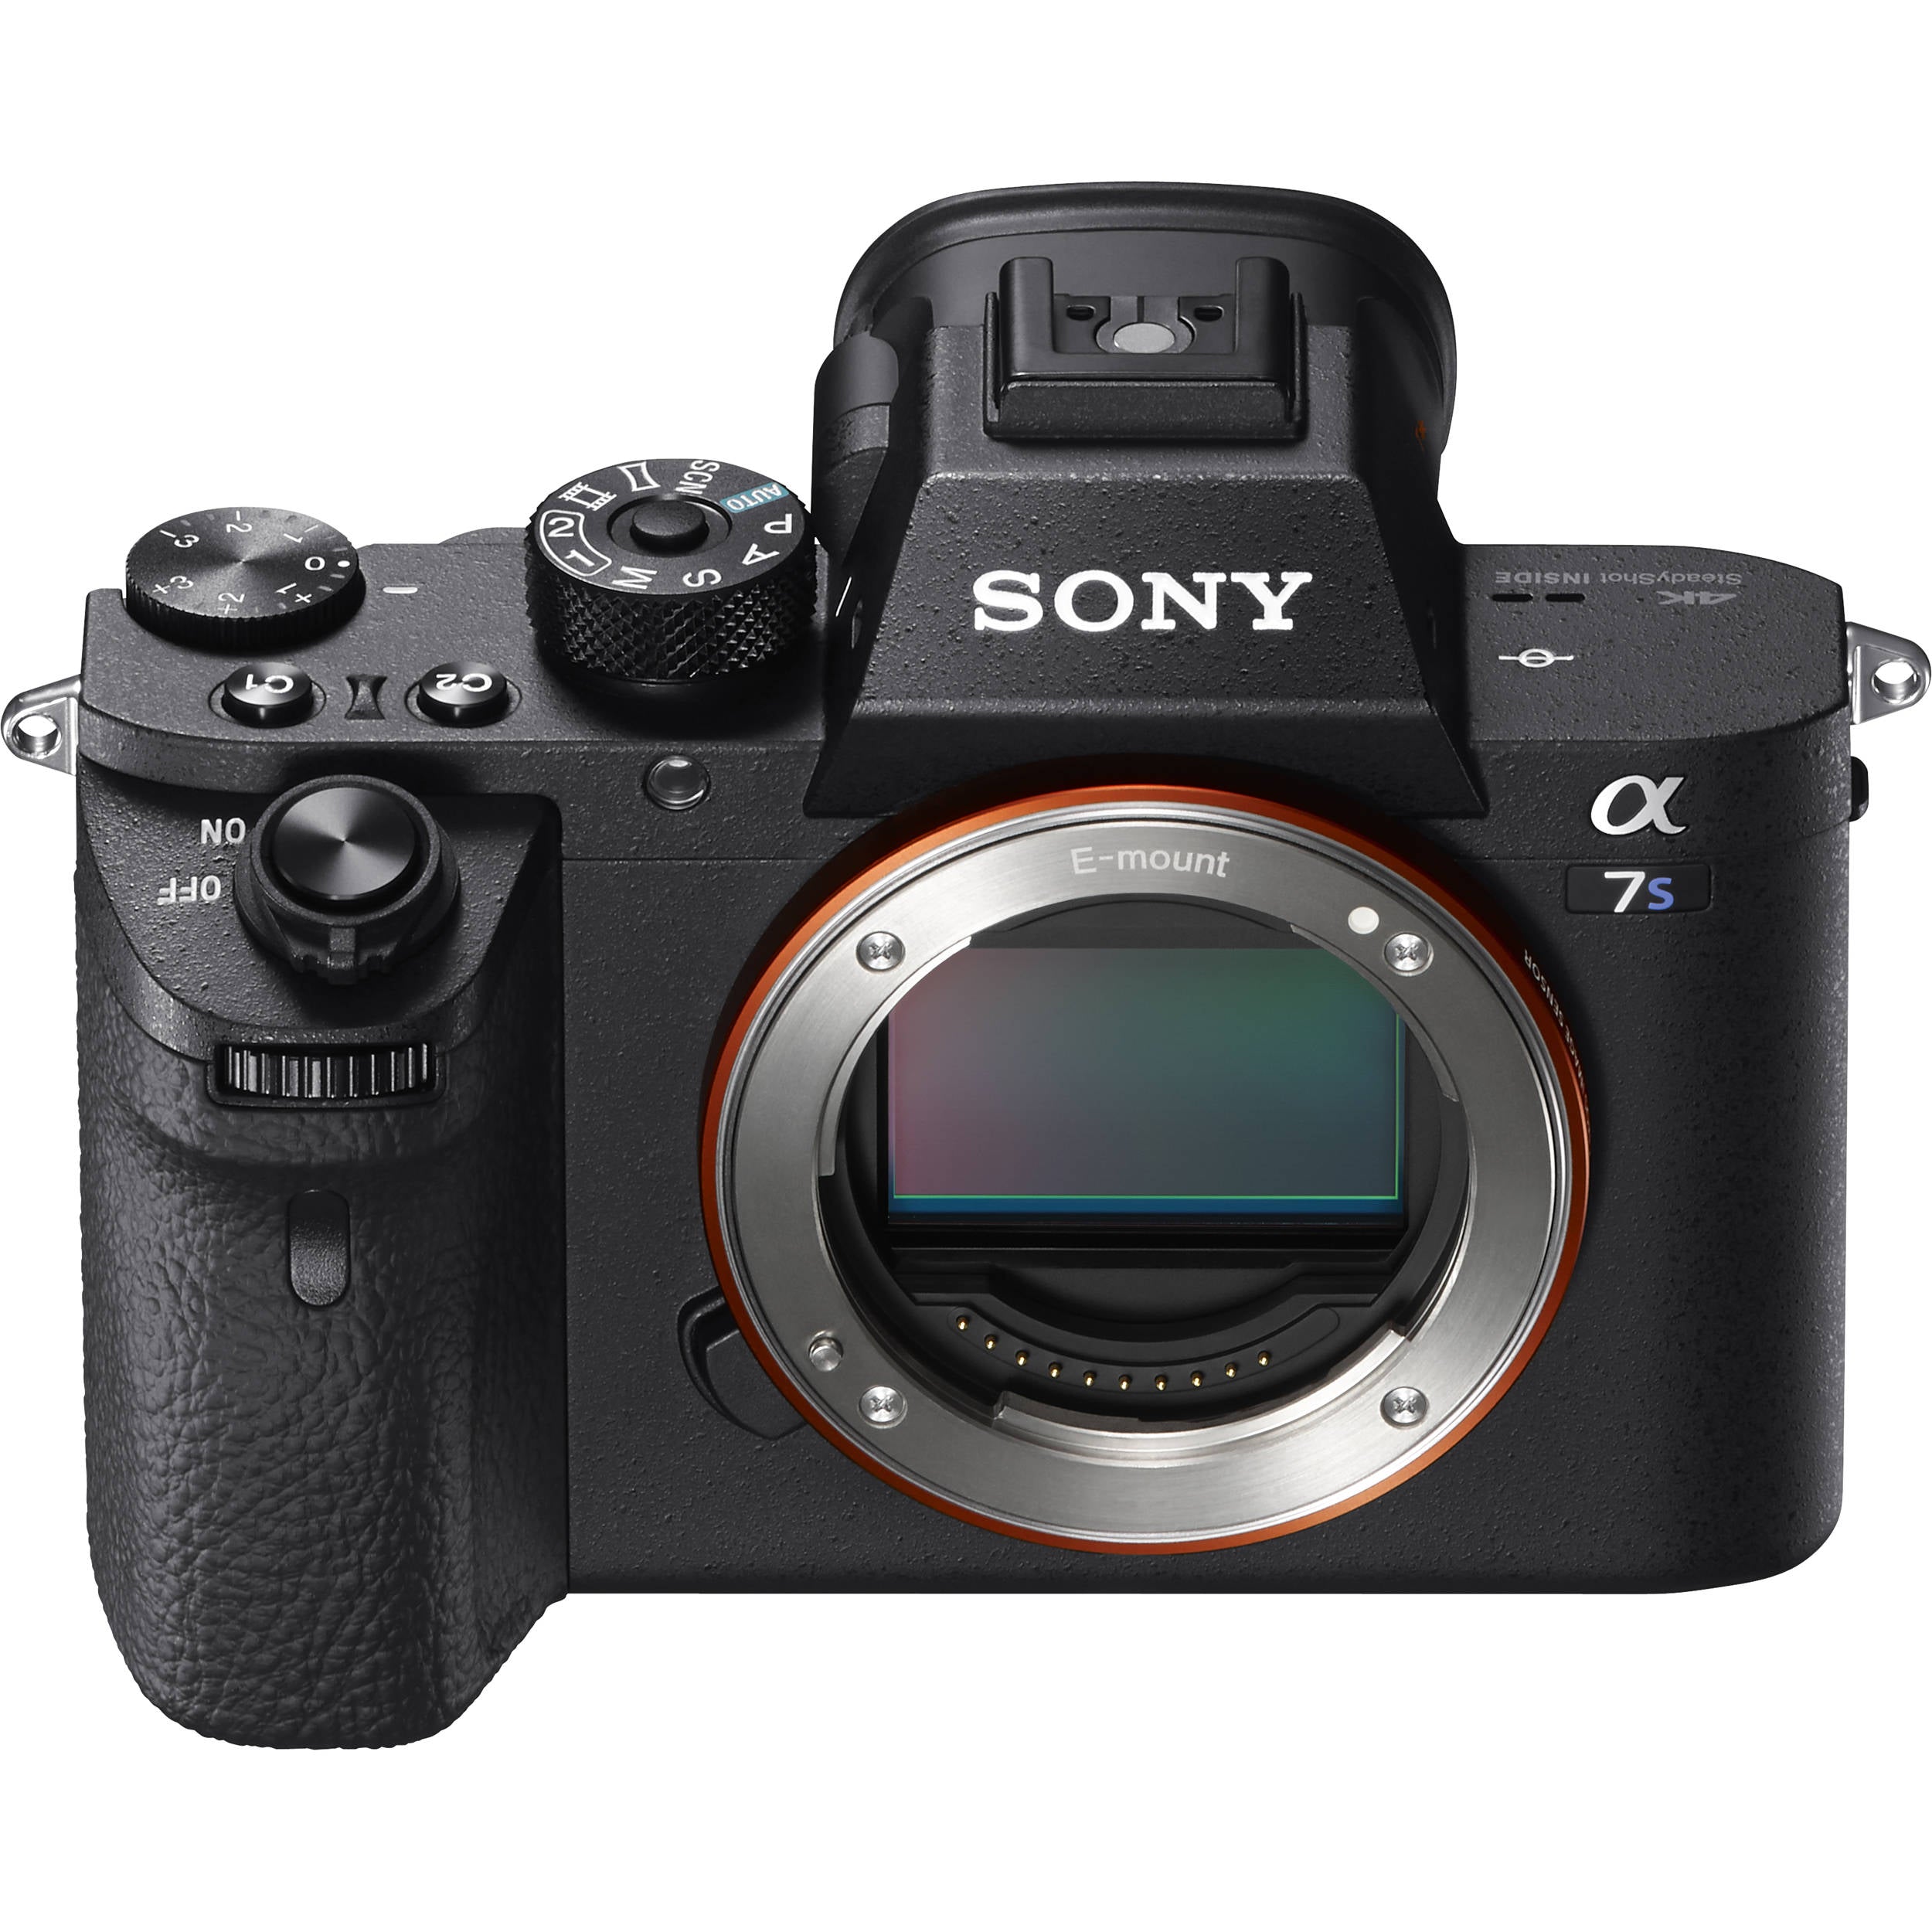 Sony Ultra HD 4K 12MP Full Frame Alpha a7S II Mirrorless Digital Camera and 5 Piece Accessories Bundle (Lens Not Included)5